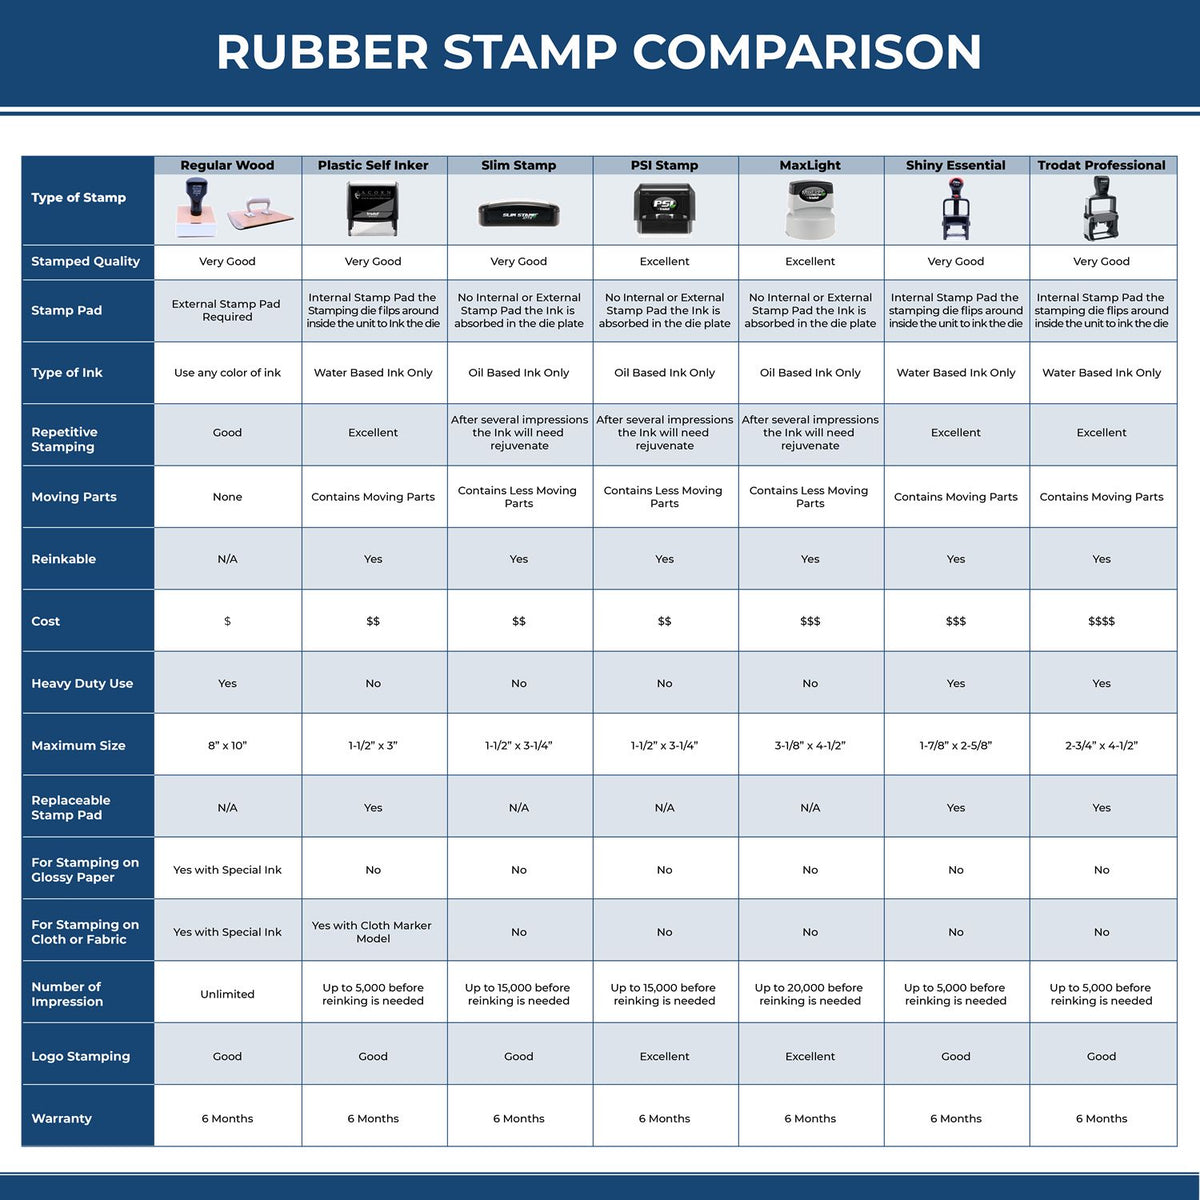 A comparison chart for the different types of mount models available for the Self-Inking Montana PE Stamp.